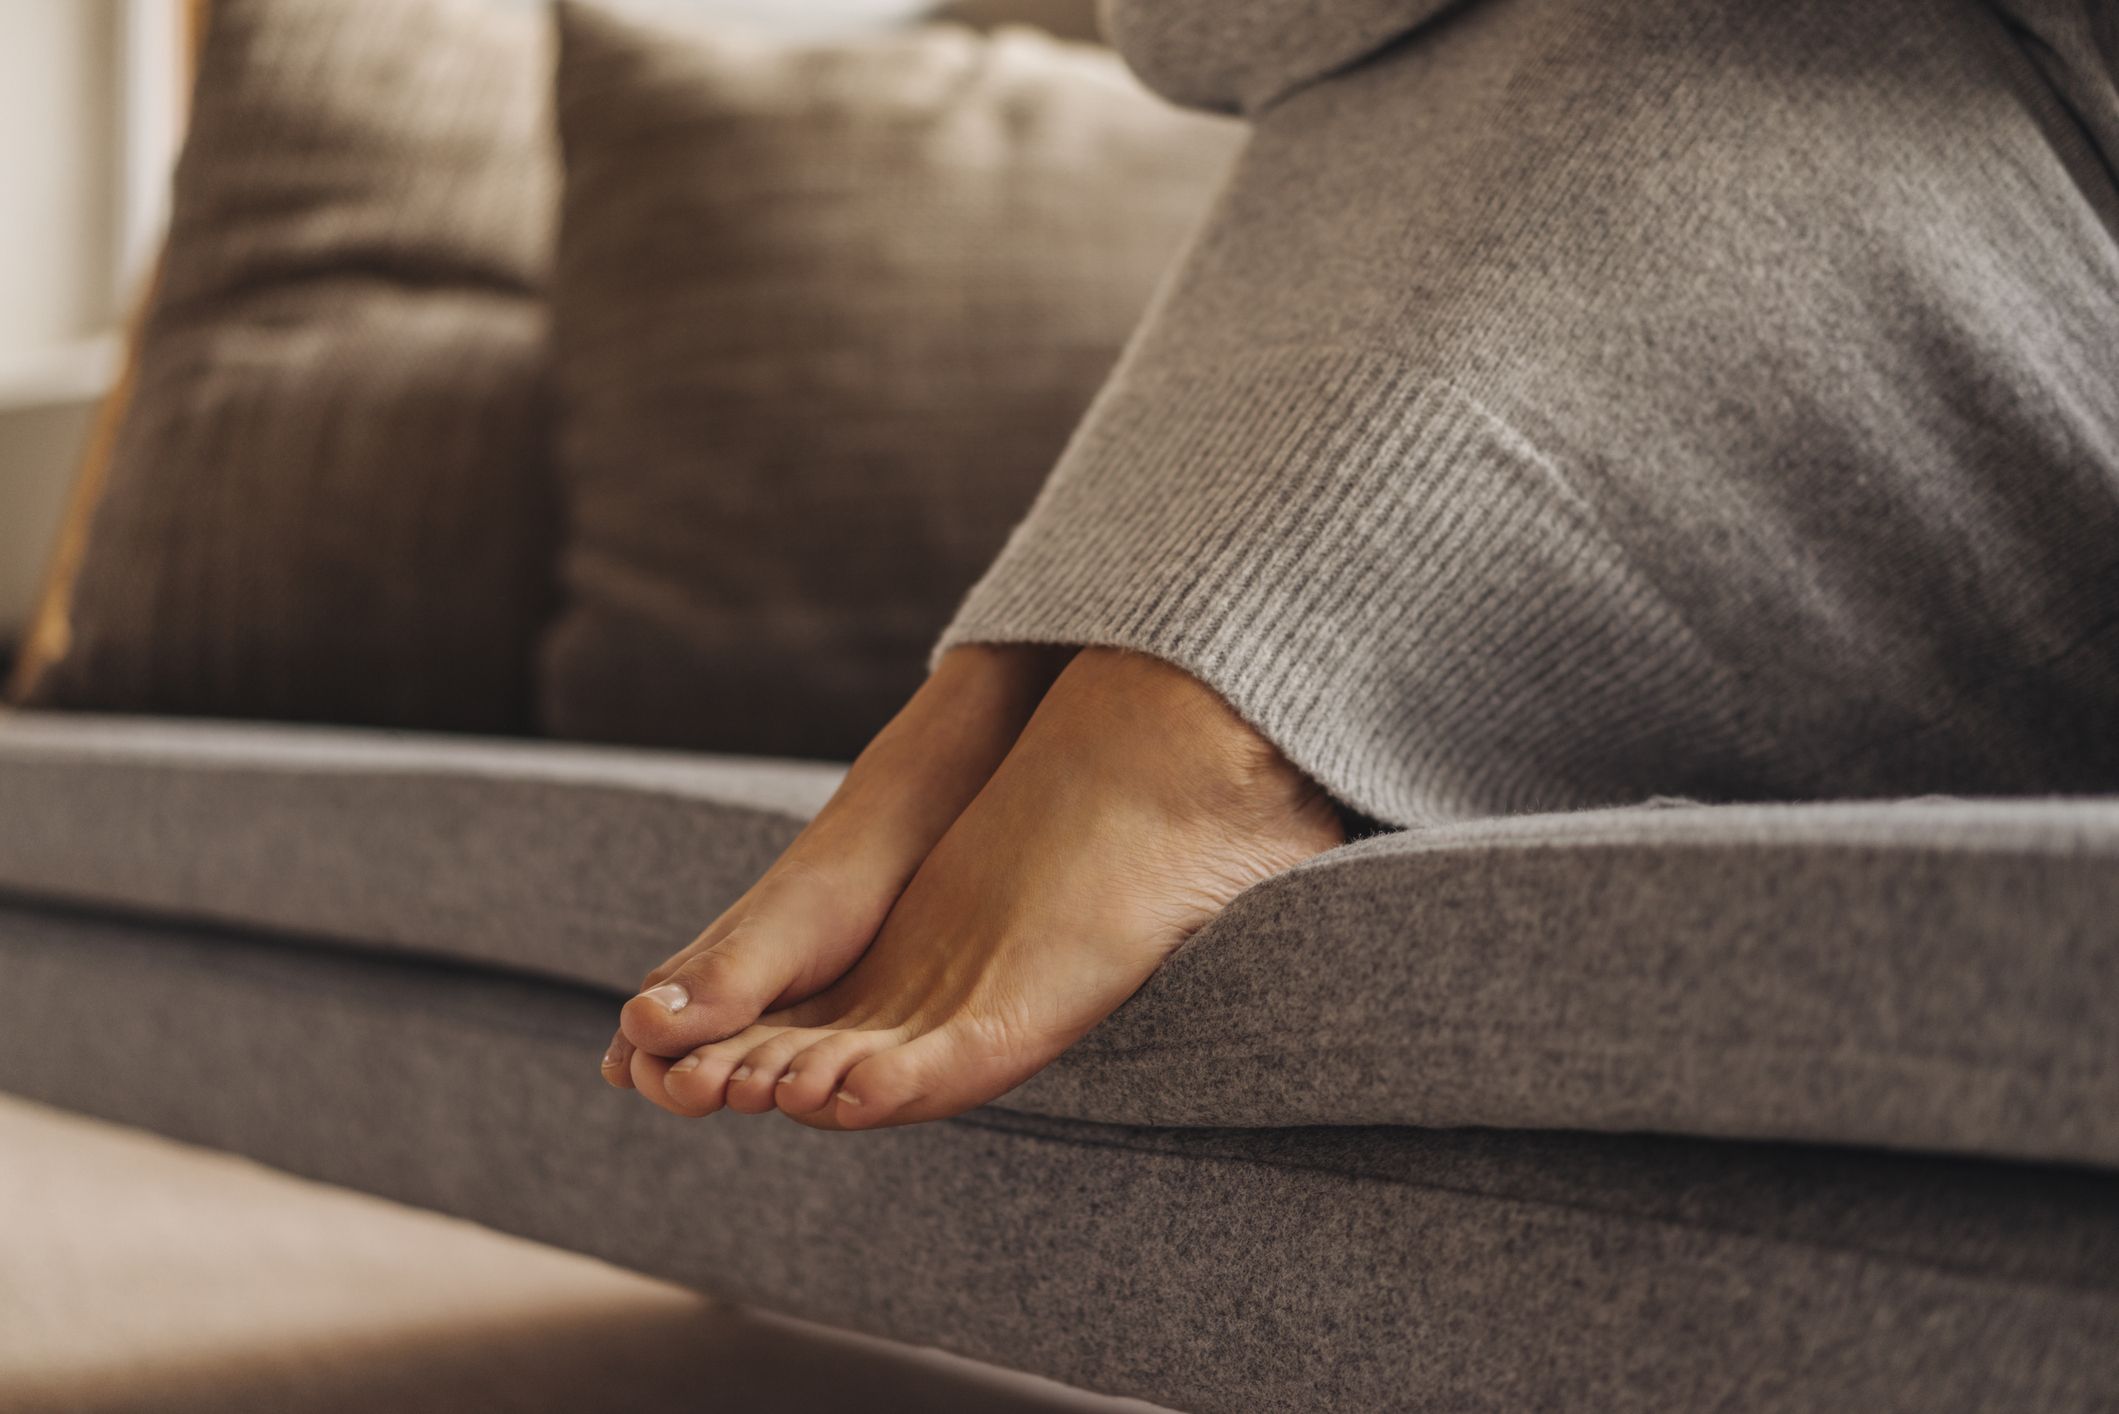 Cold feet: How to keep your feet warm - 5 top tips